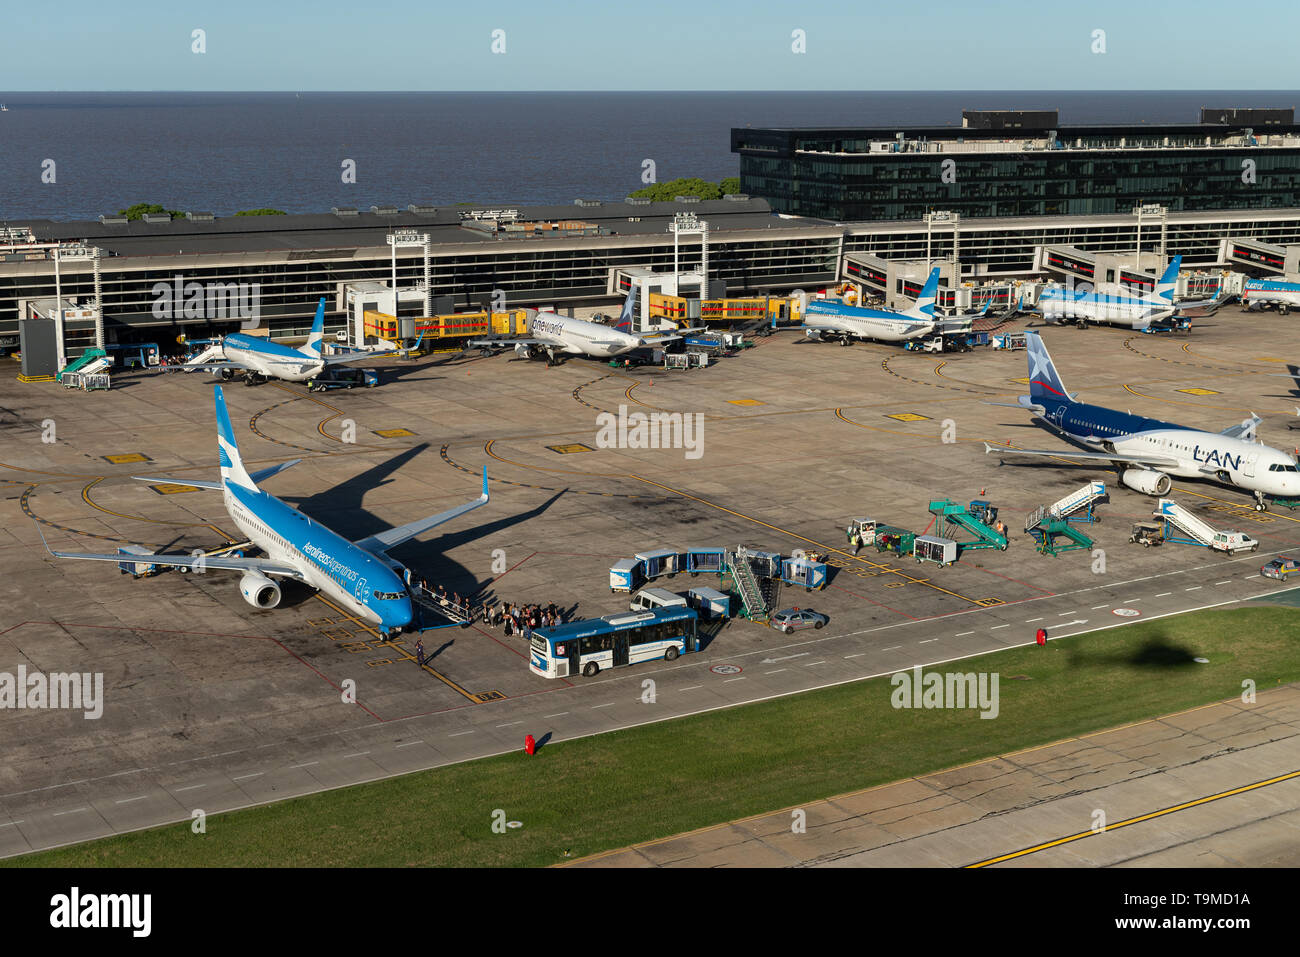 Aerial image of Jorge Newbery Airfield (Spanish: Aeroparque "Jorge Newbery", IATA: AEP, ICAO: SABE) is an international airport located in Palermo nei Stock Photo